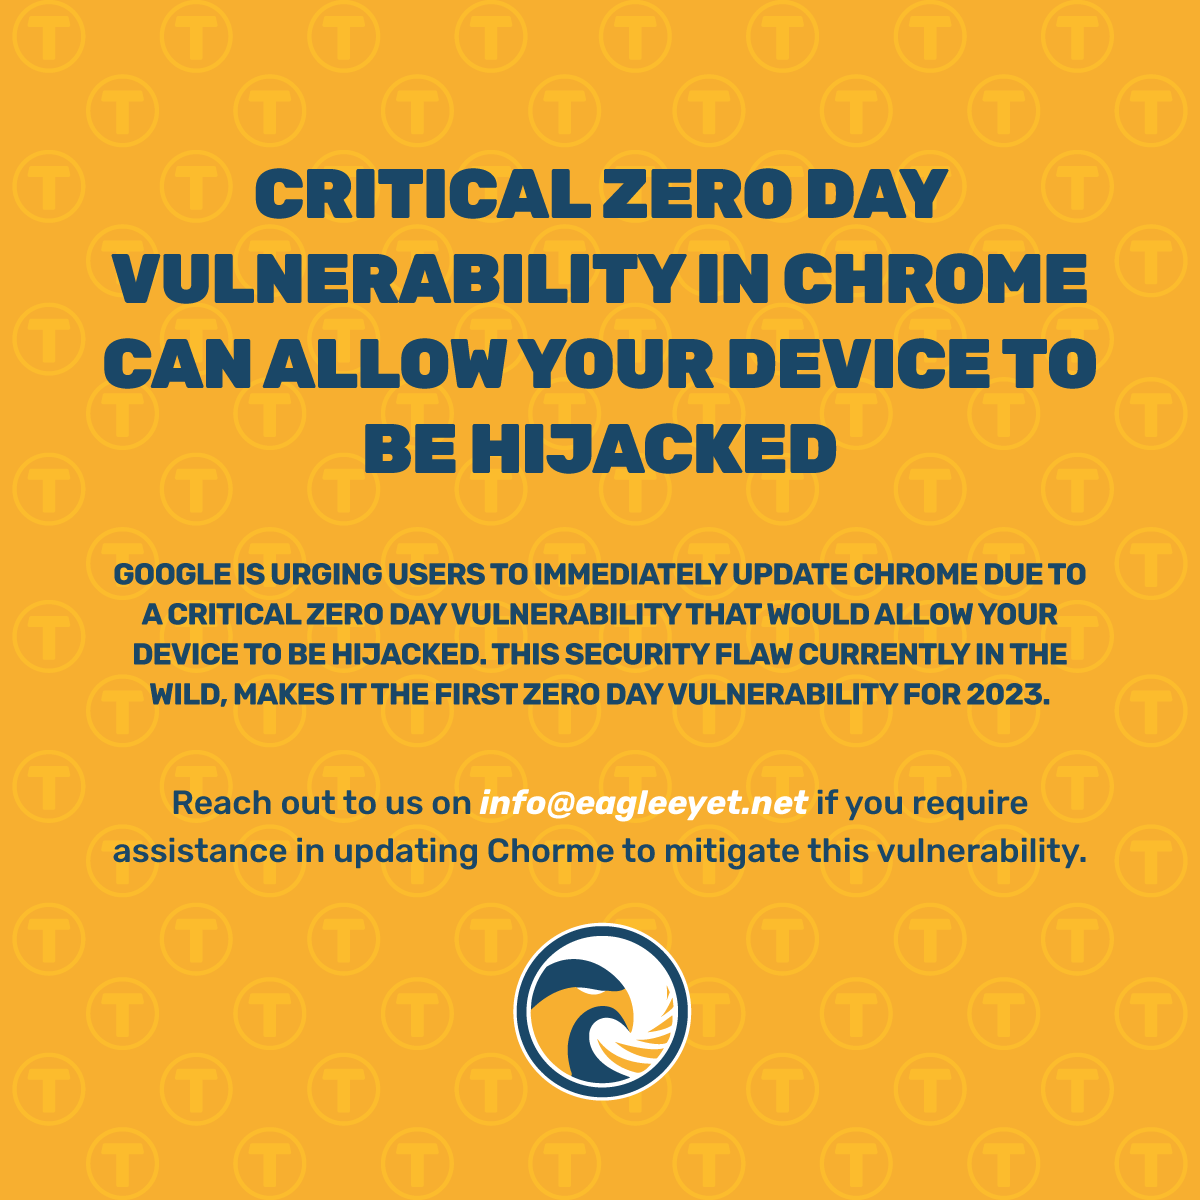 Critical Zero Day Vulnerability in Chrome Can Allow Your Device To Be Hijacked